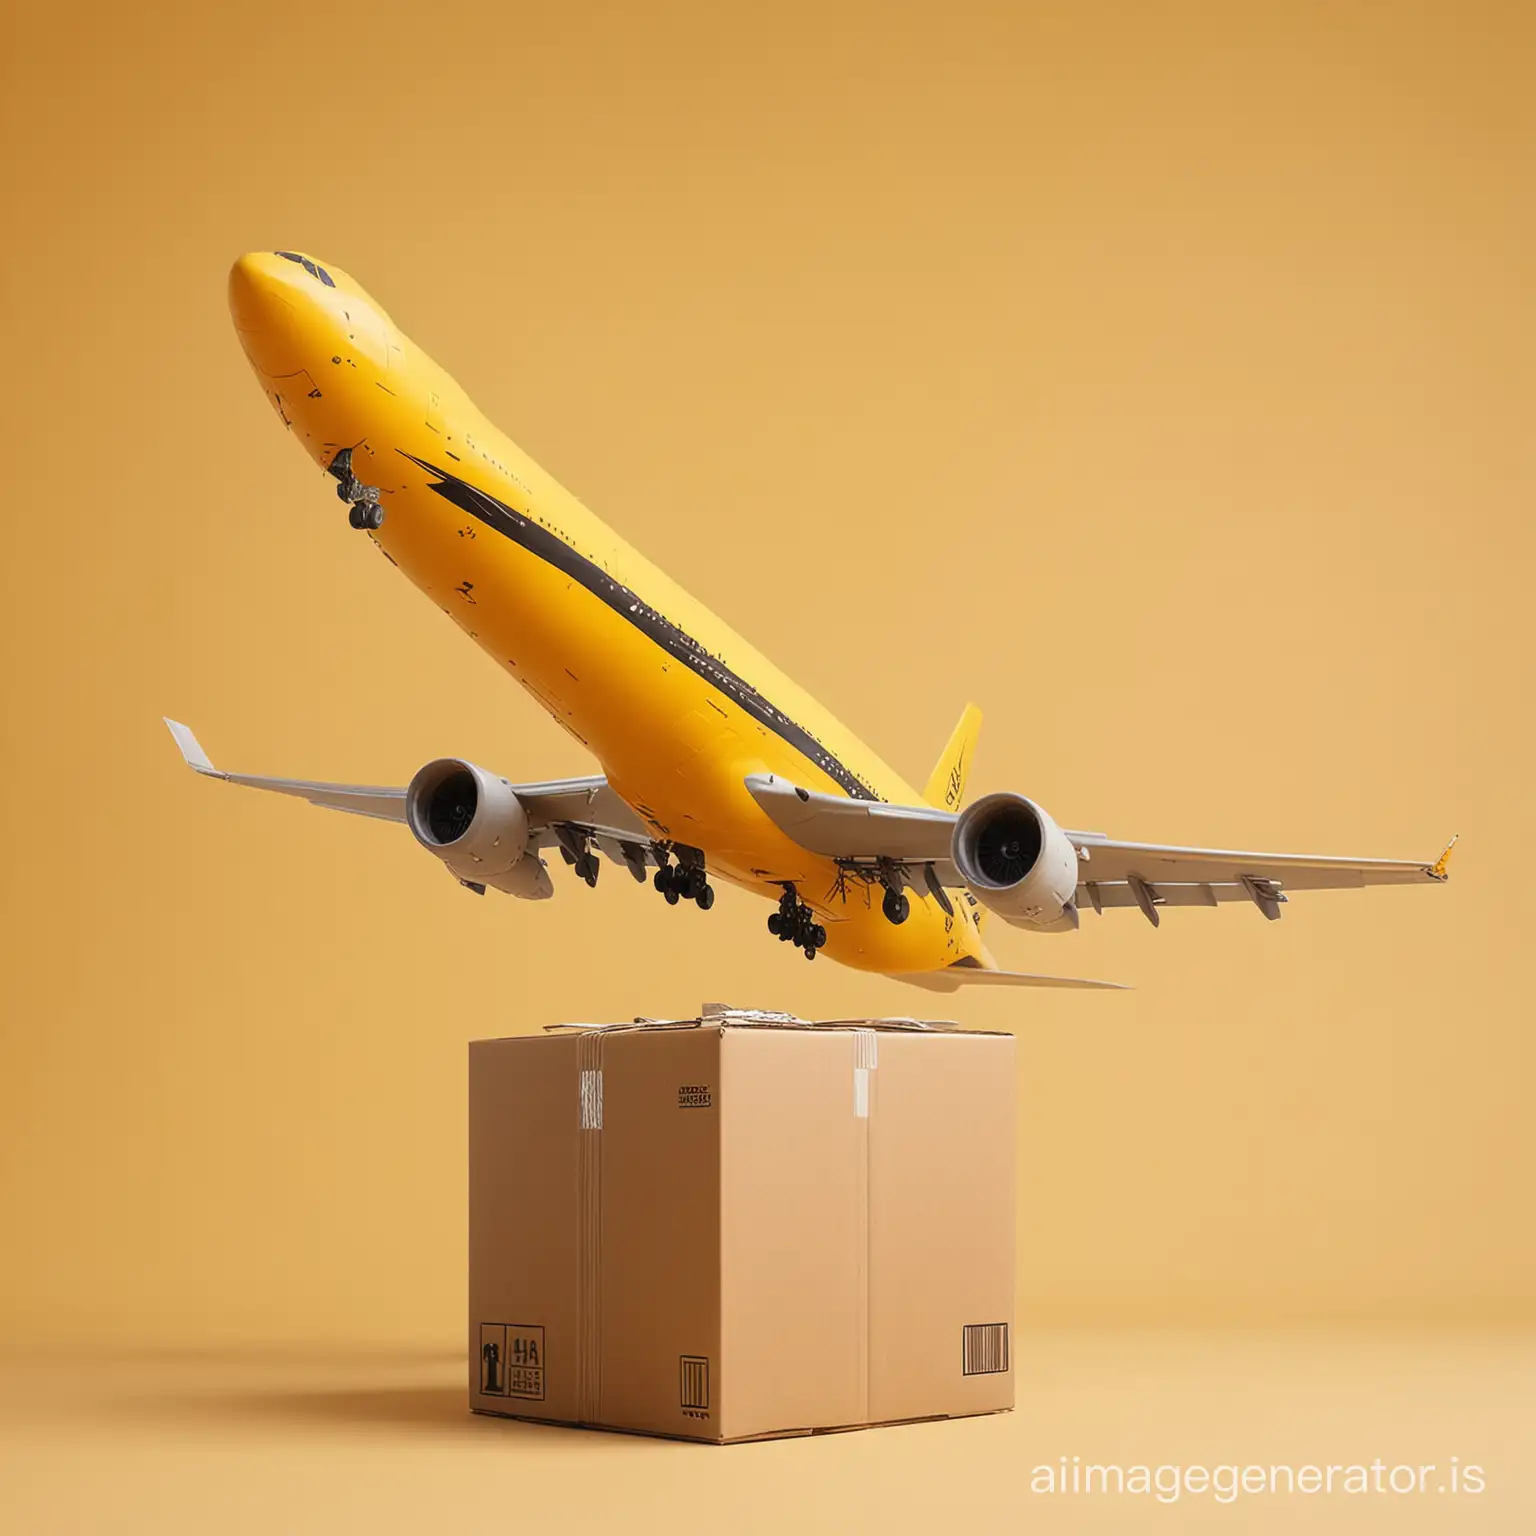 Air-Cargo-Transfer-from-Afghanistan-to-America-on-Vibrant-Yellow-Backdrop